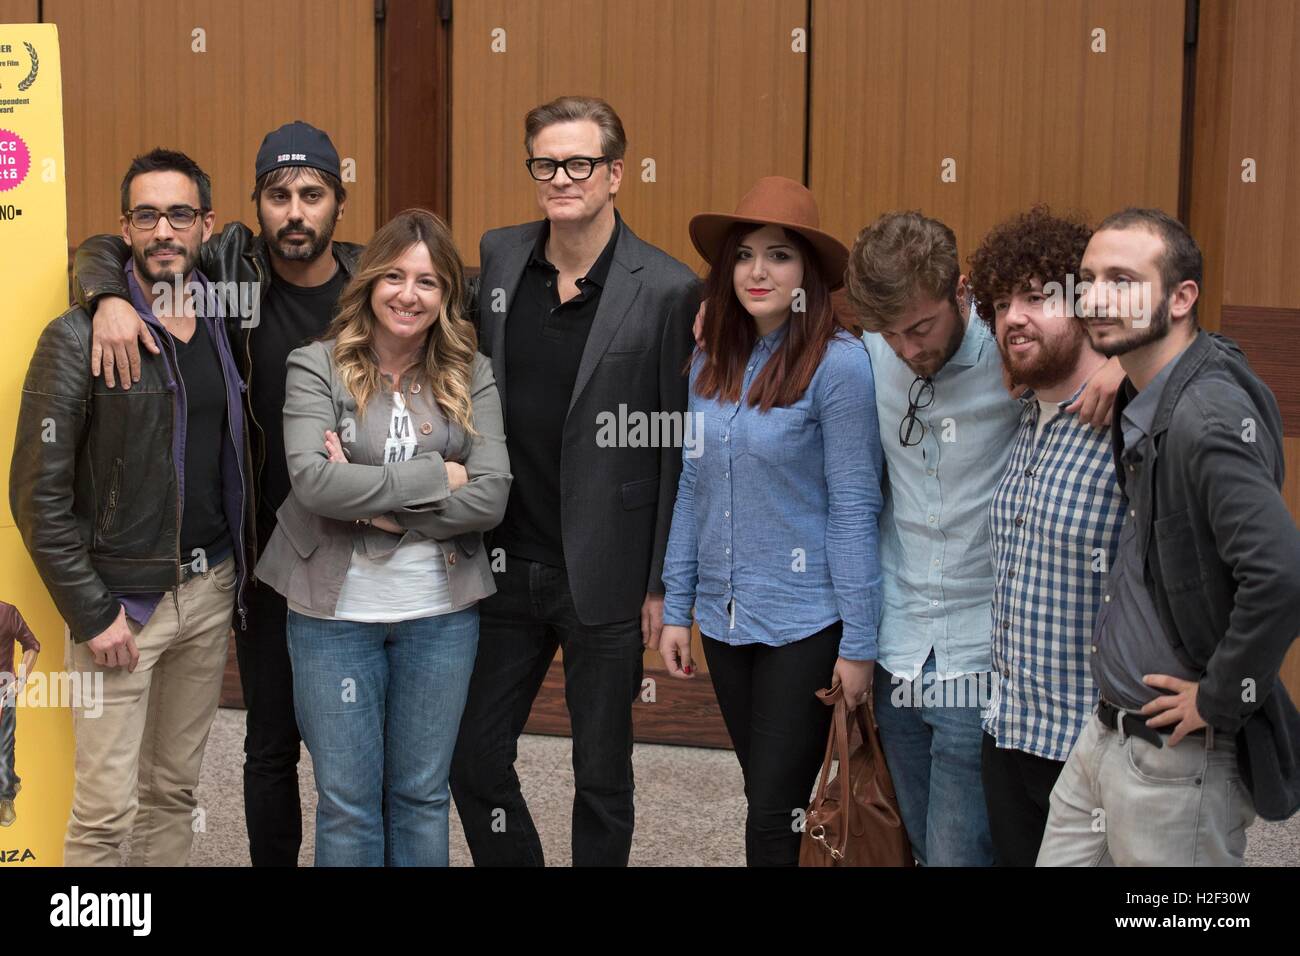 Italy, Rome, 27 October 2016 : British actor Colin Firth attends the photocall of the italian movie 'In bici senza sella' (Driving a seatless bicycle) to support the young temporary workers at La Sapienza University of Rome    Photo Credit:  Fabio Mazzarella/Sintesi/Alamy Live News Stock Photo